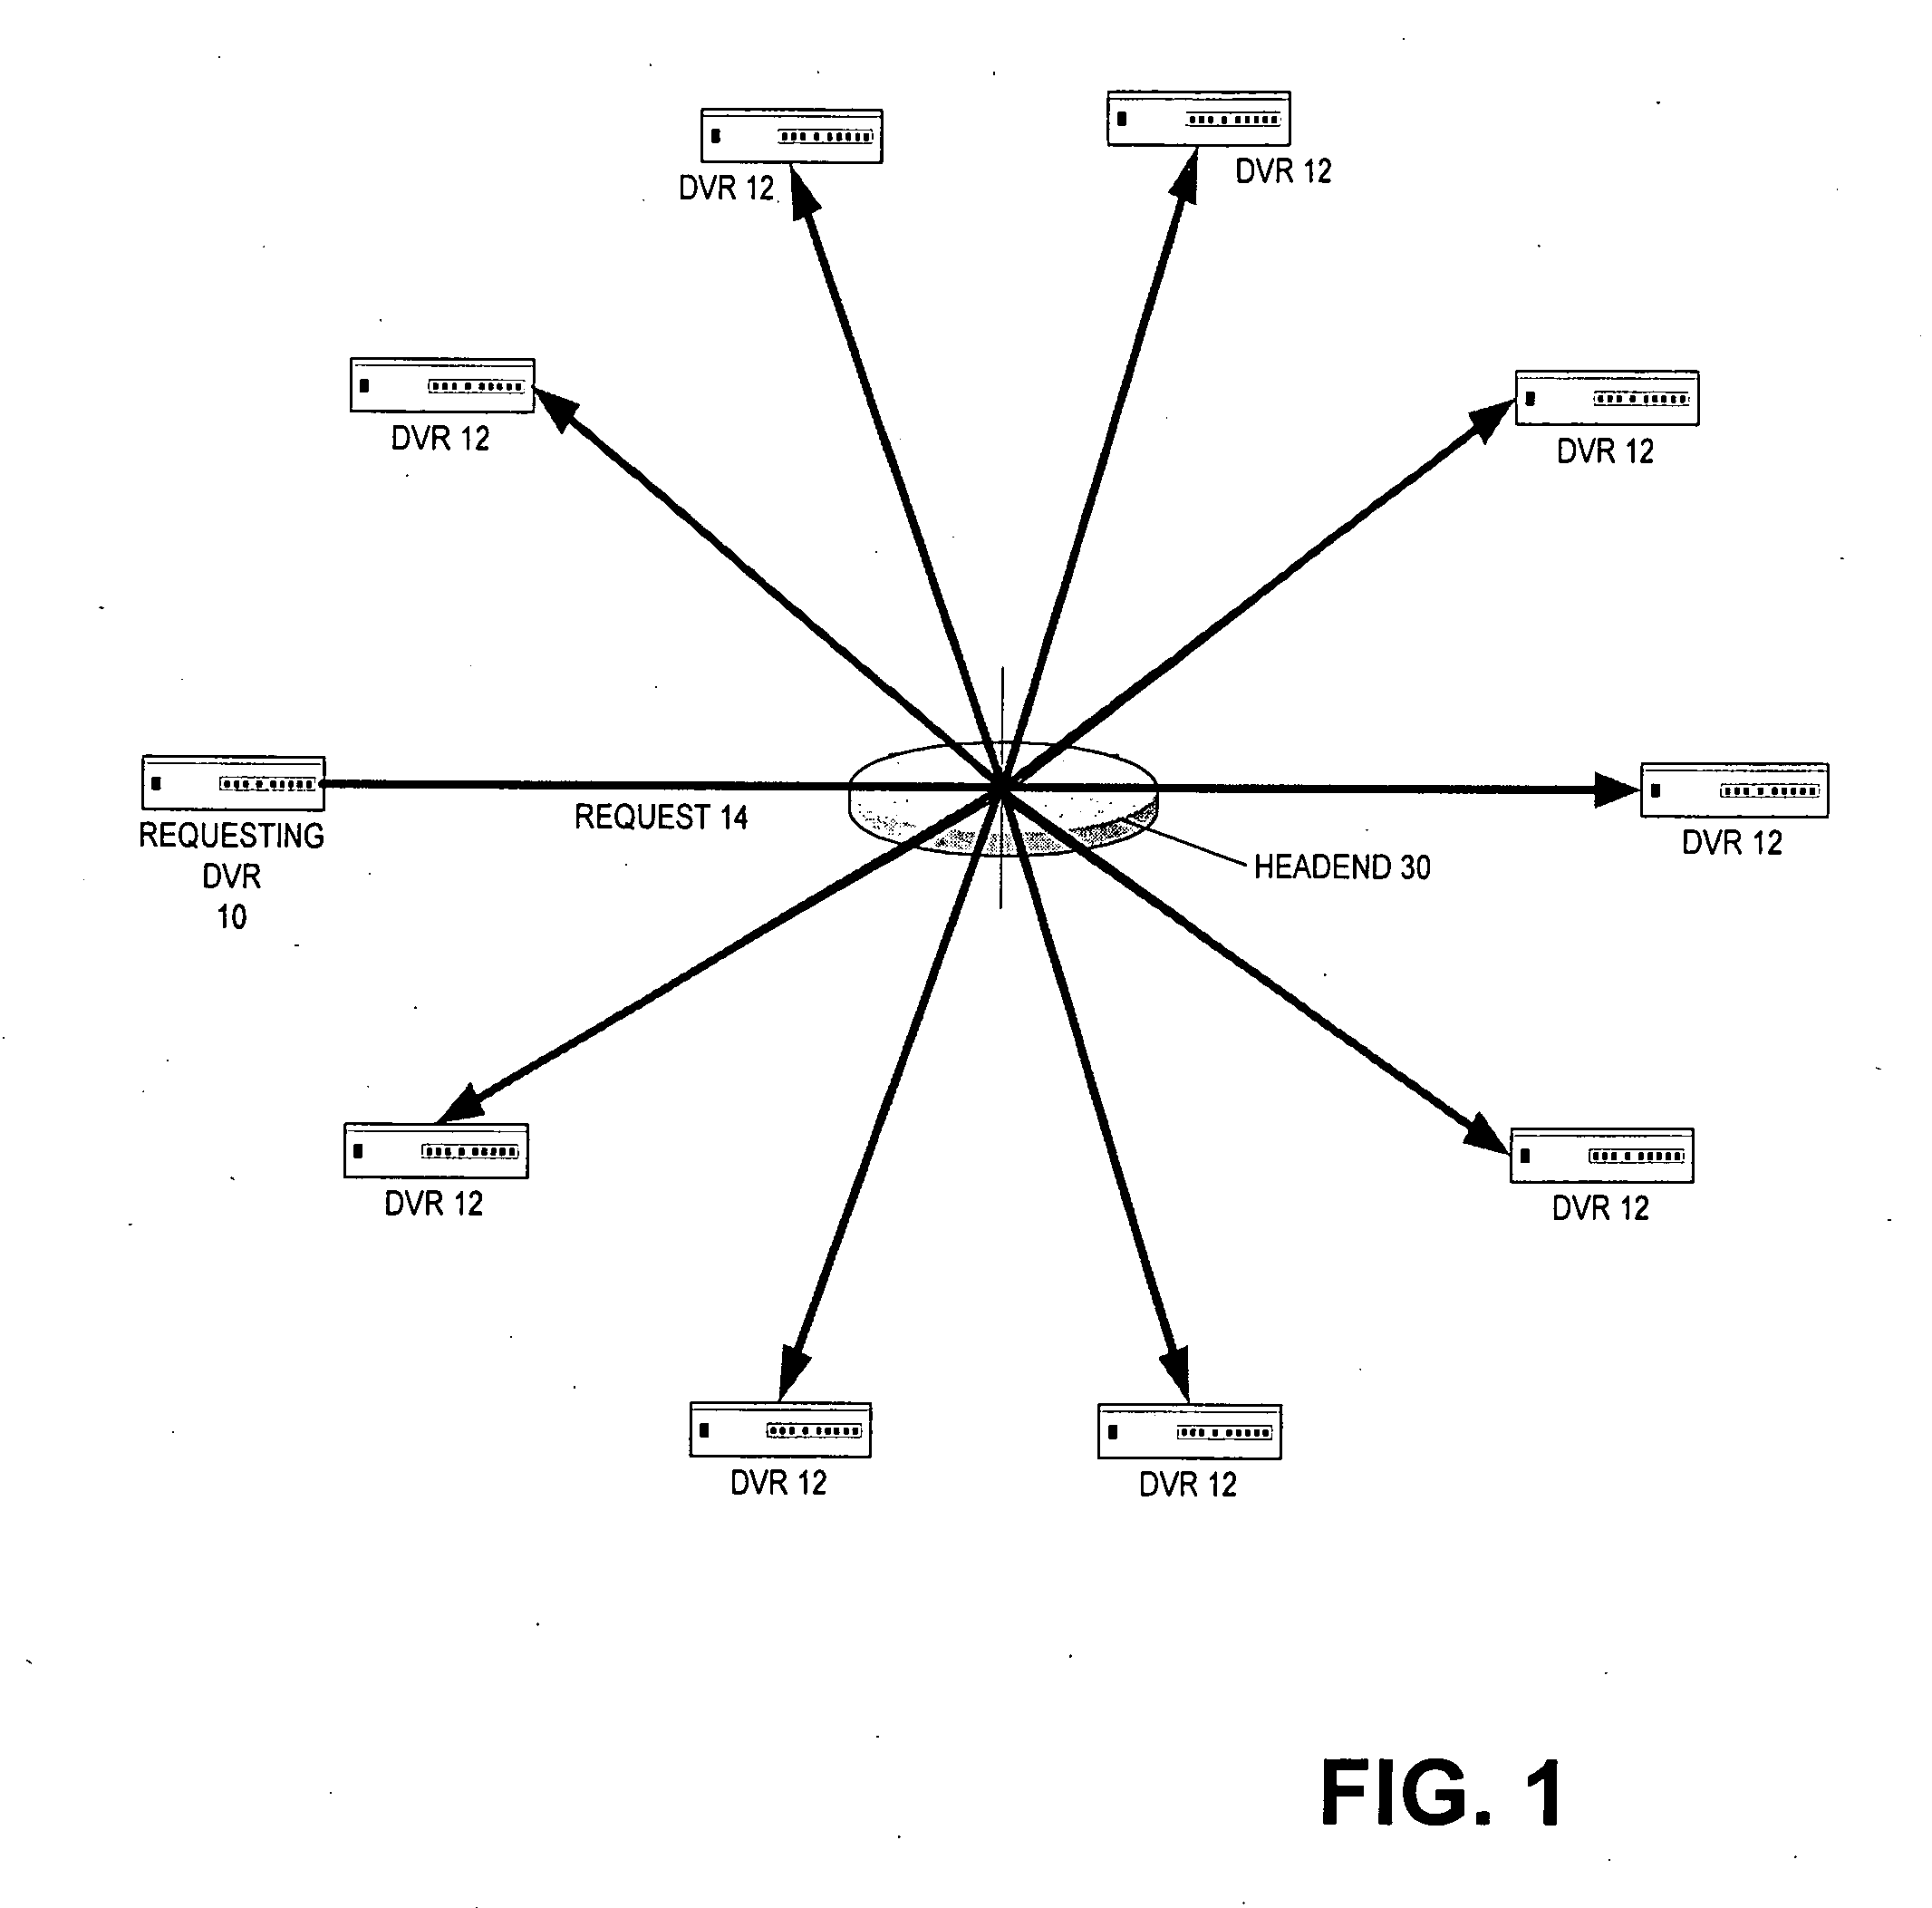 Multi-device distributed digital video recording systems and methods